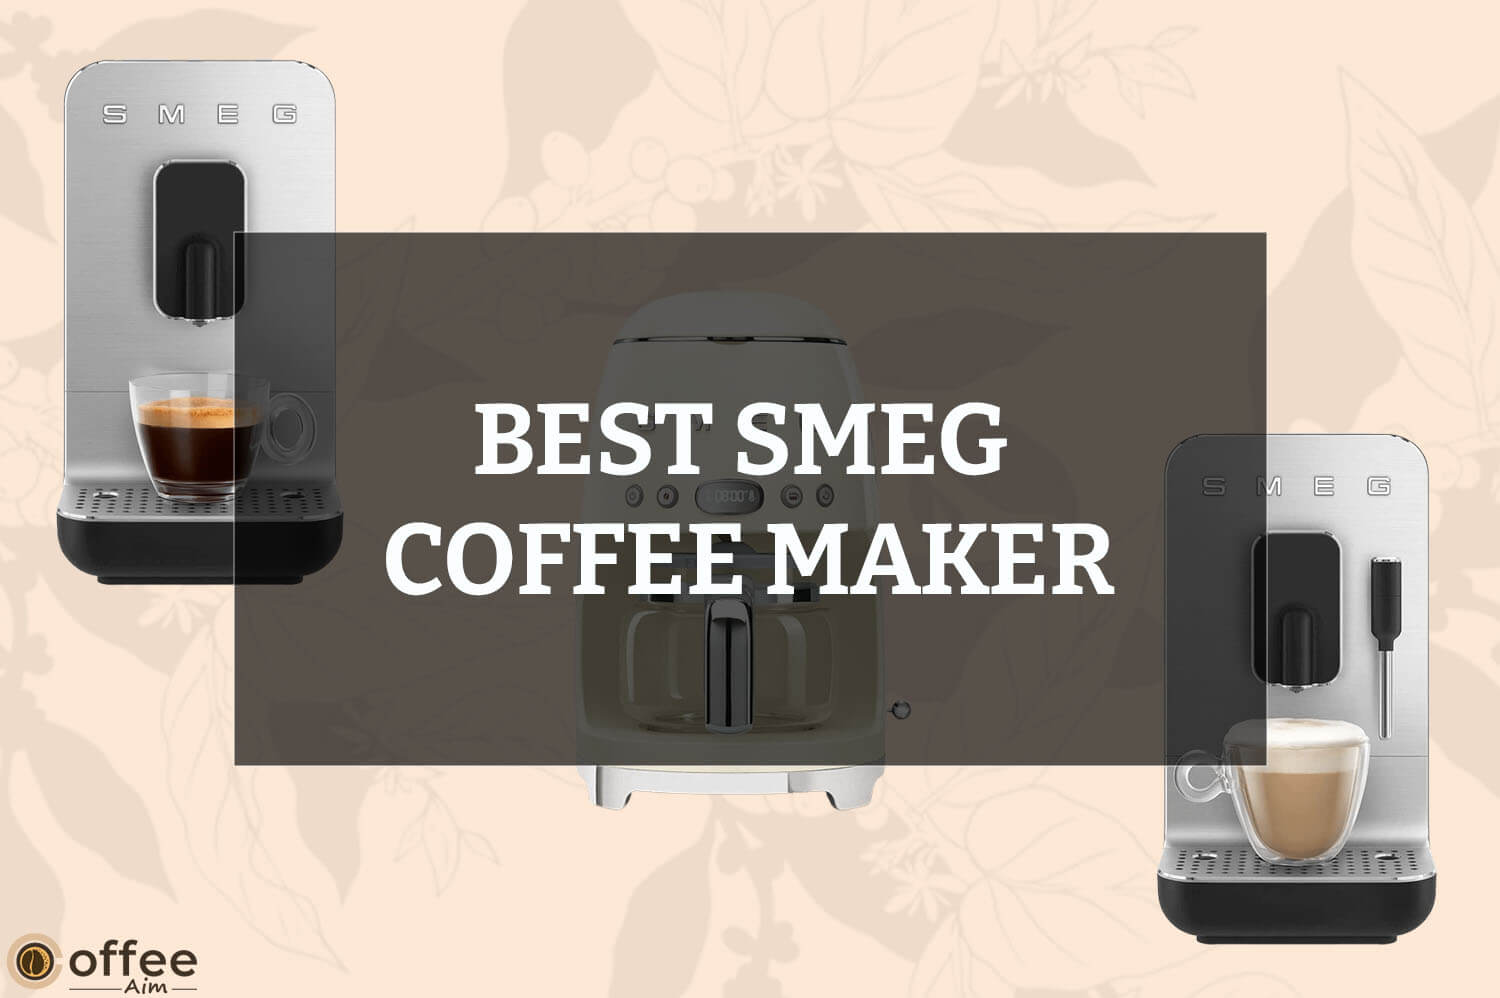 Featured image for the article "Best Smeg Coffee Maker"